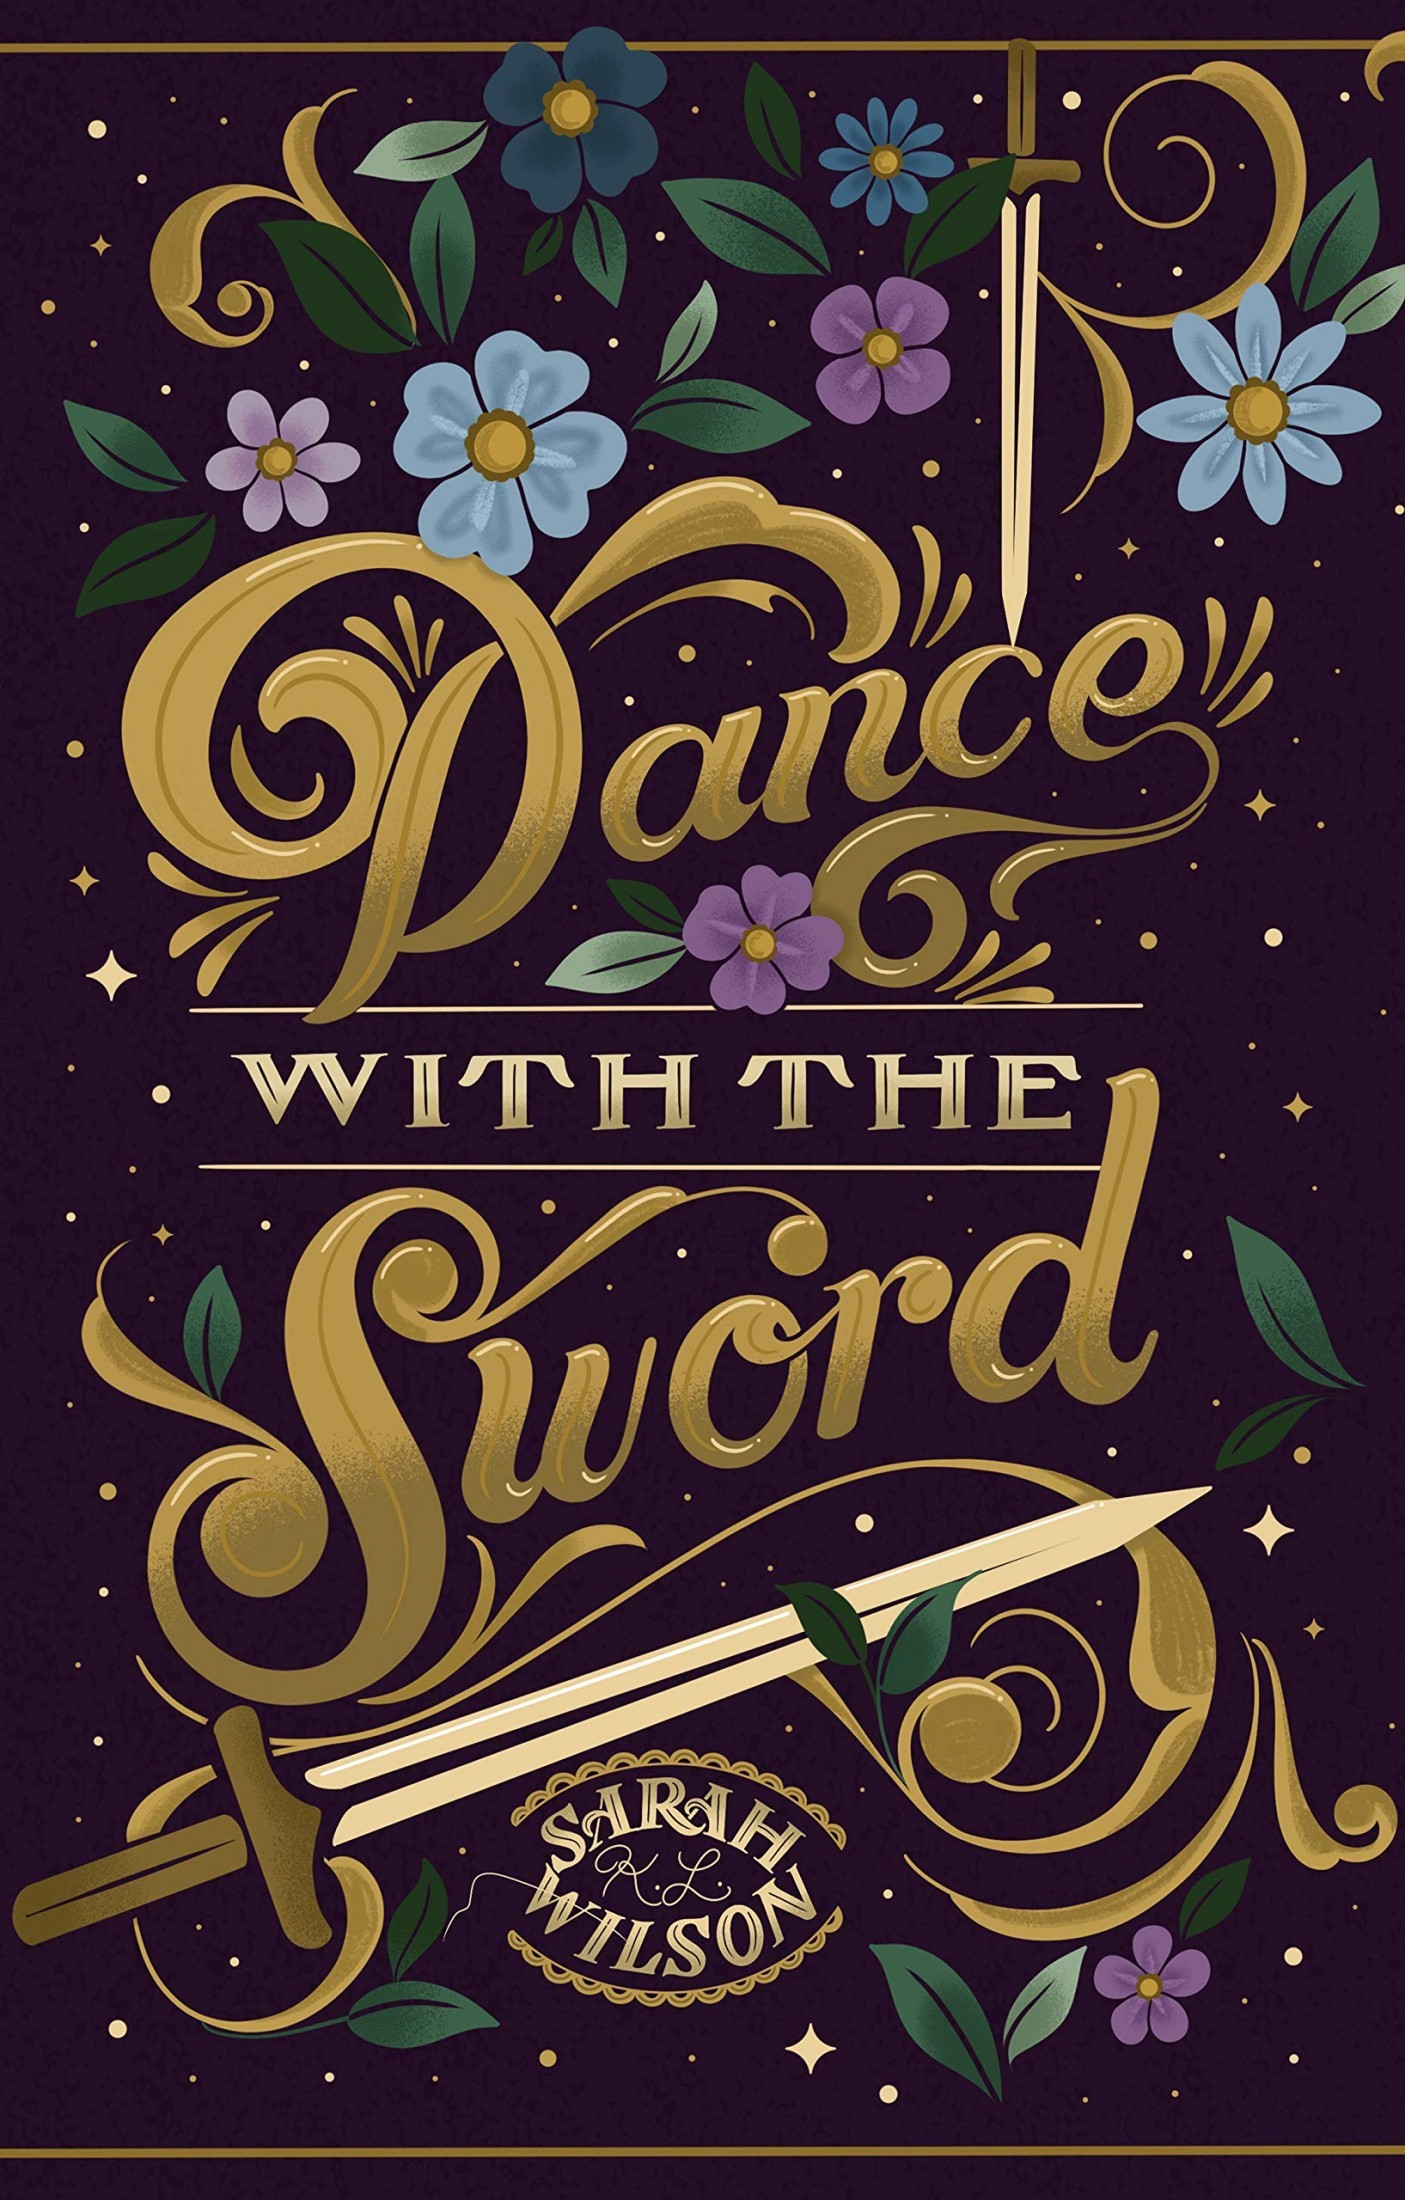 Dance With the Sword